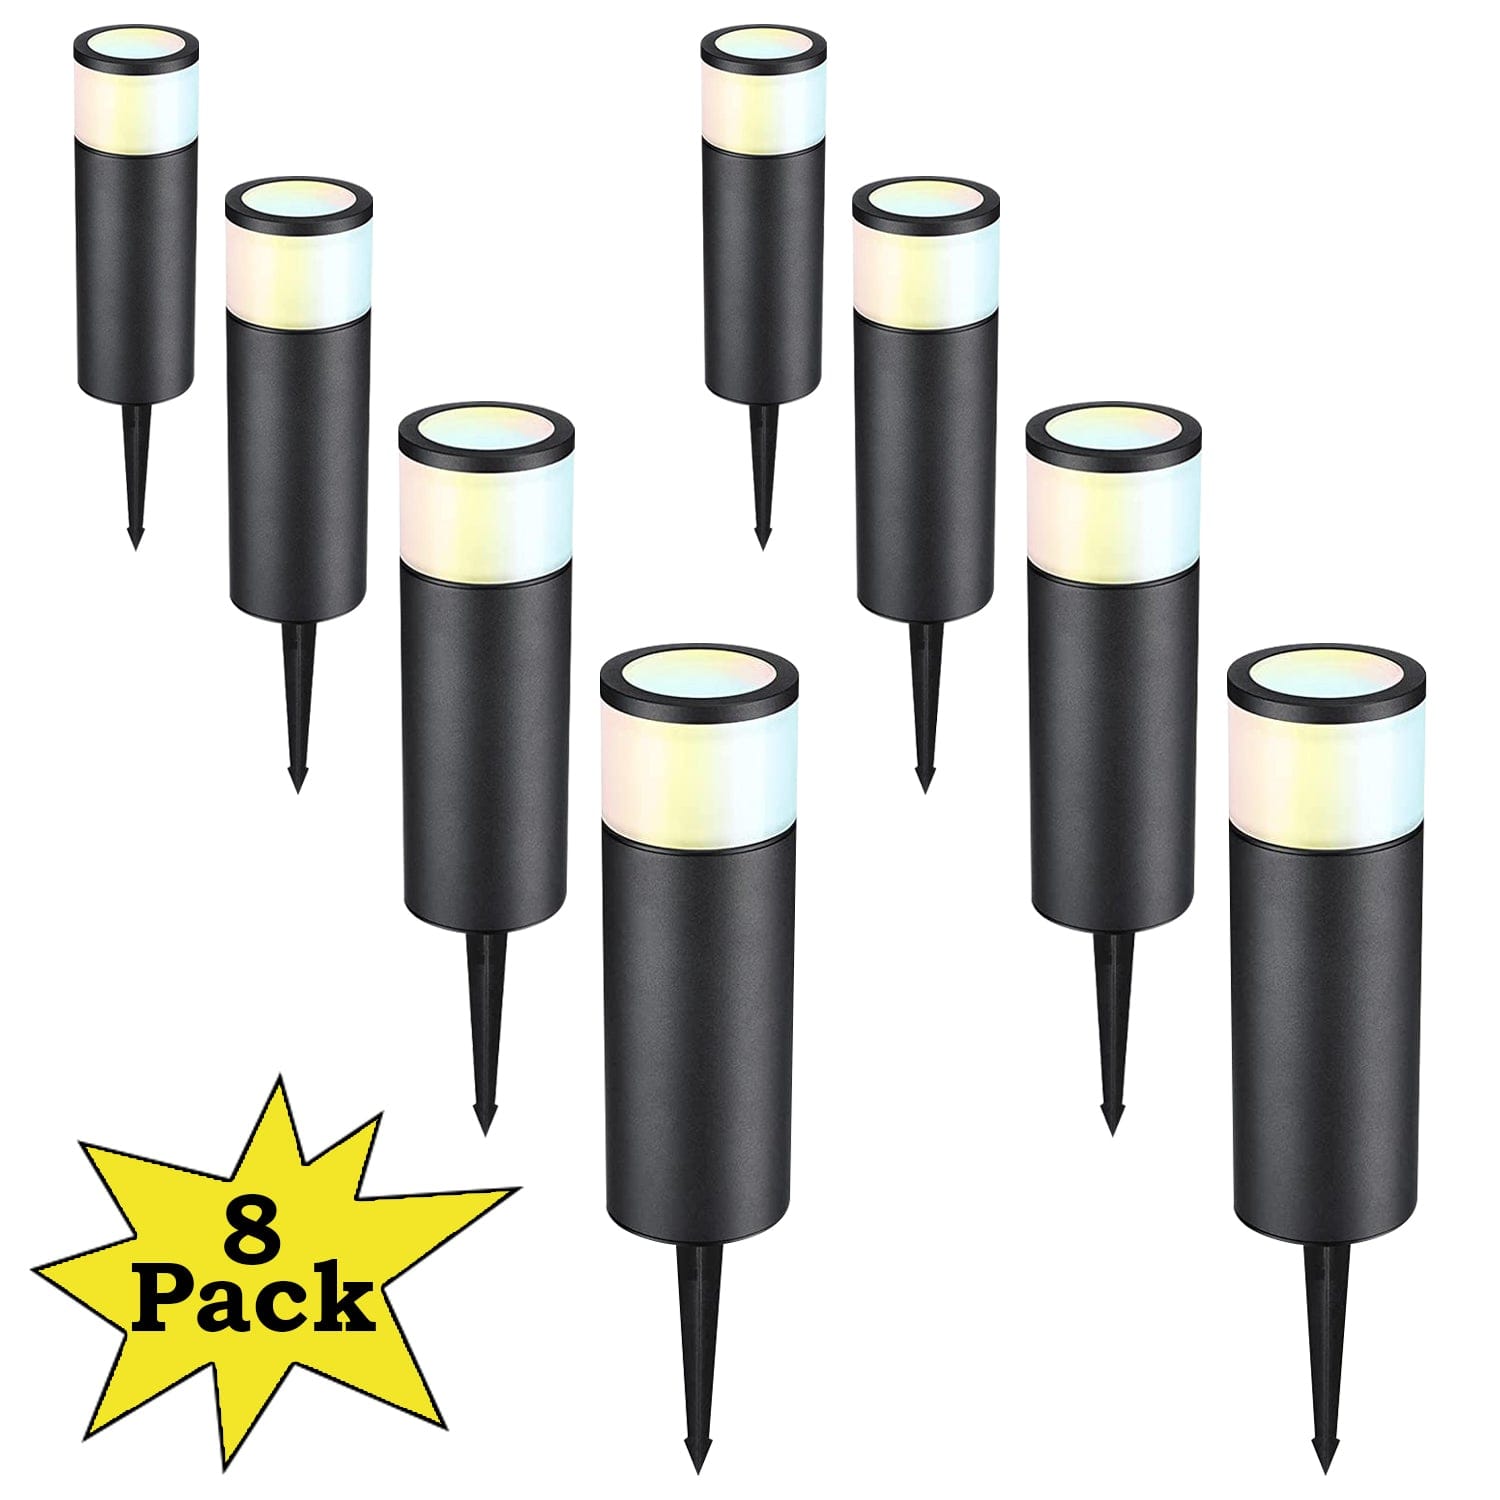 ABBA Lighting USA, ALPCC08 8-Pack 4.5W 5CCT LED Landscape Pathway Light Package, 12V Low Voltage Modern Path Lights